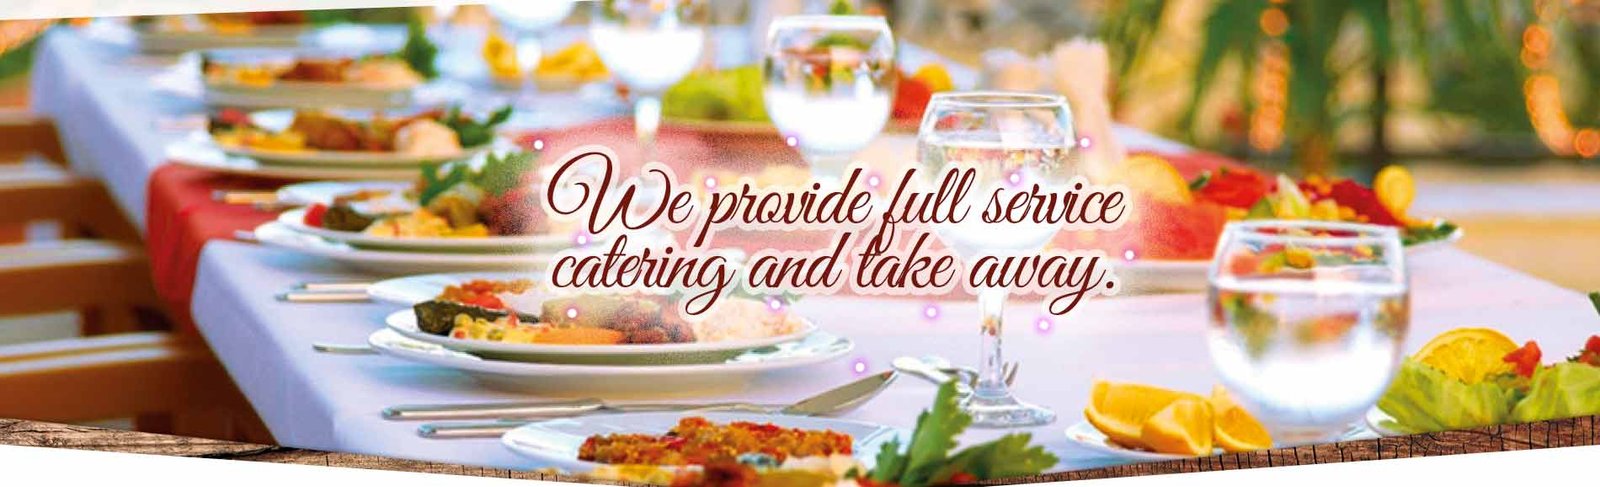 Catering and Restaurant Services in Wymore, NE